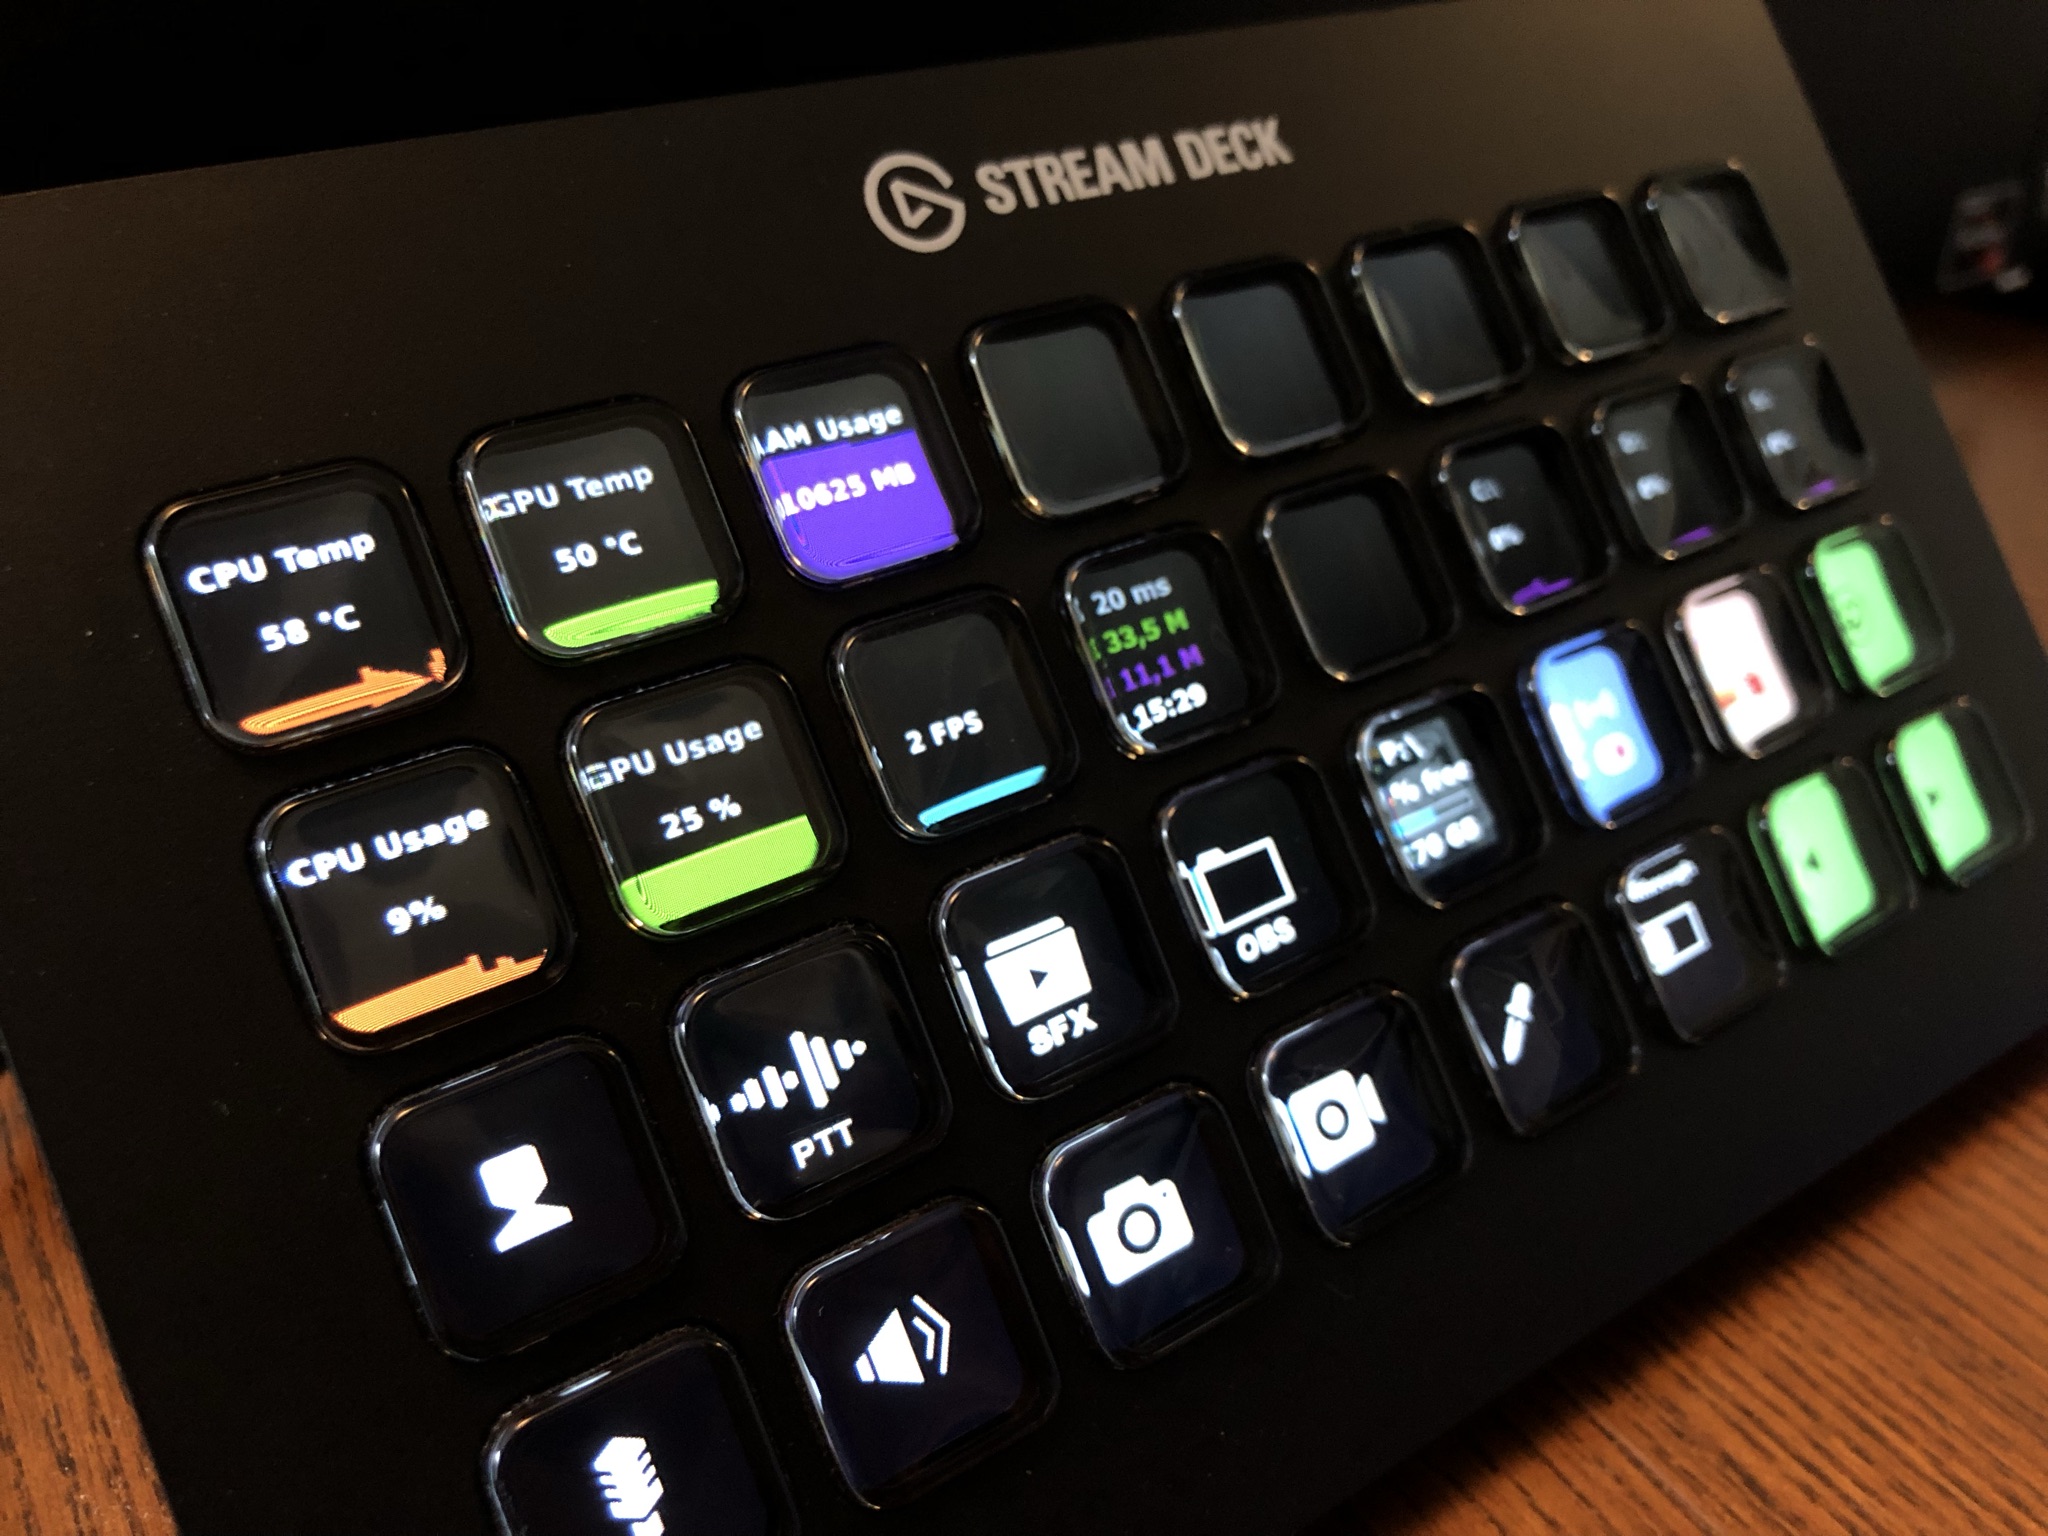 An Elgato Stream Deck XL, featuring a button dedicated to Push-To-Talk.